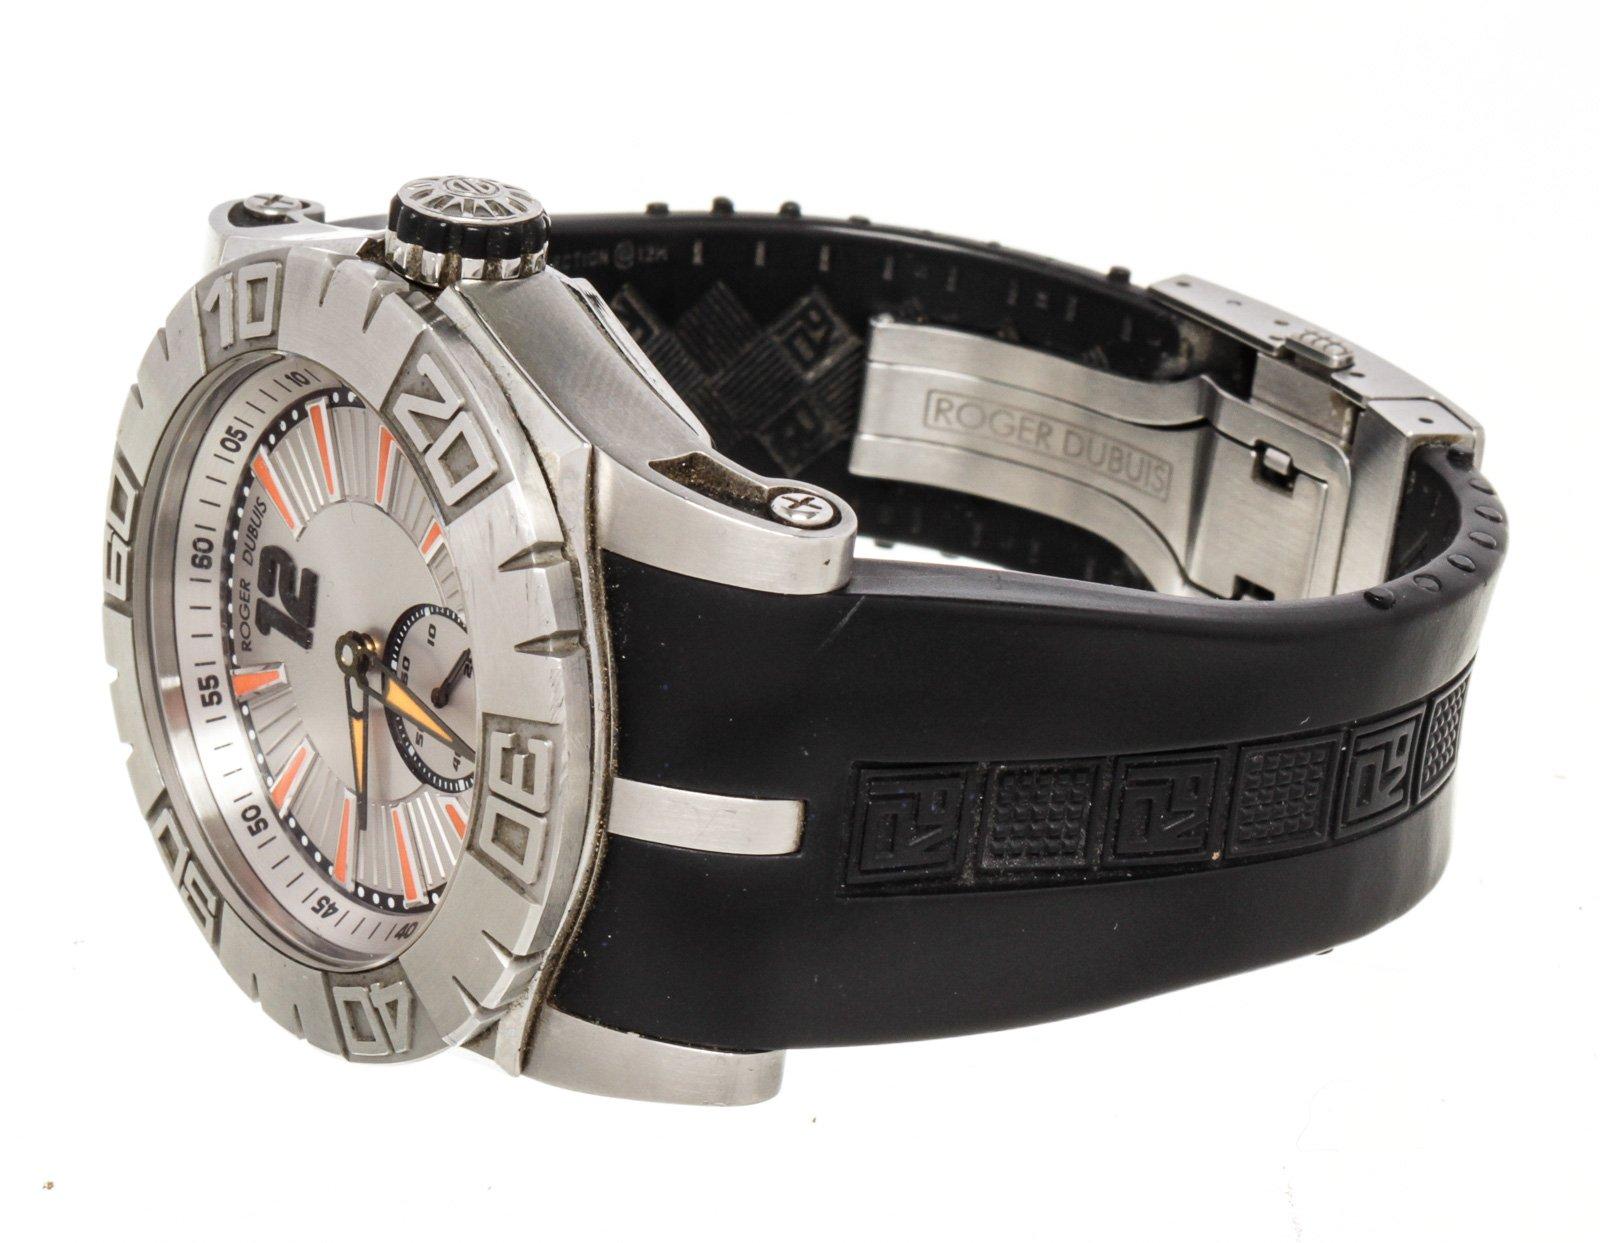 roger dubuis easy diver